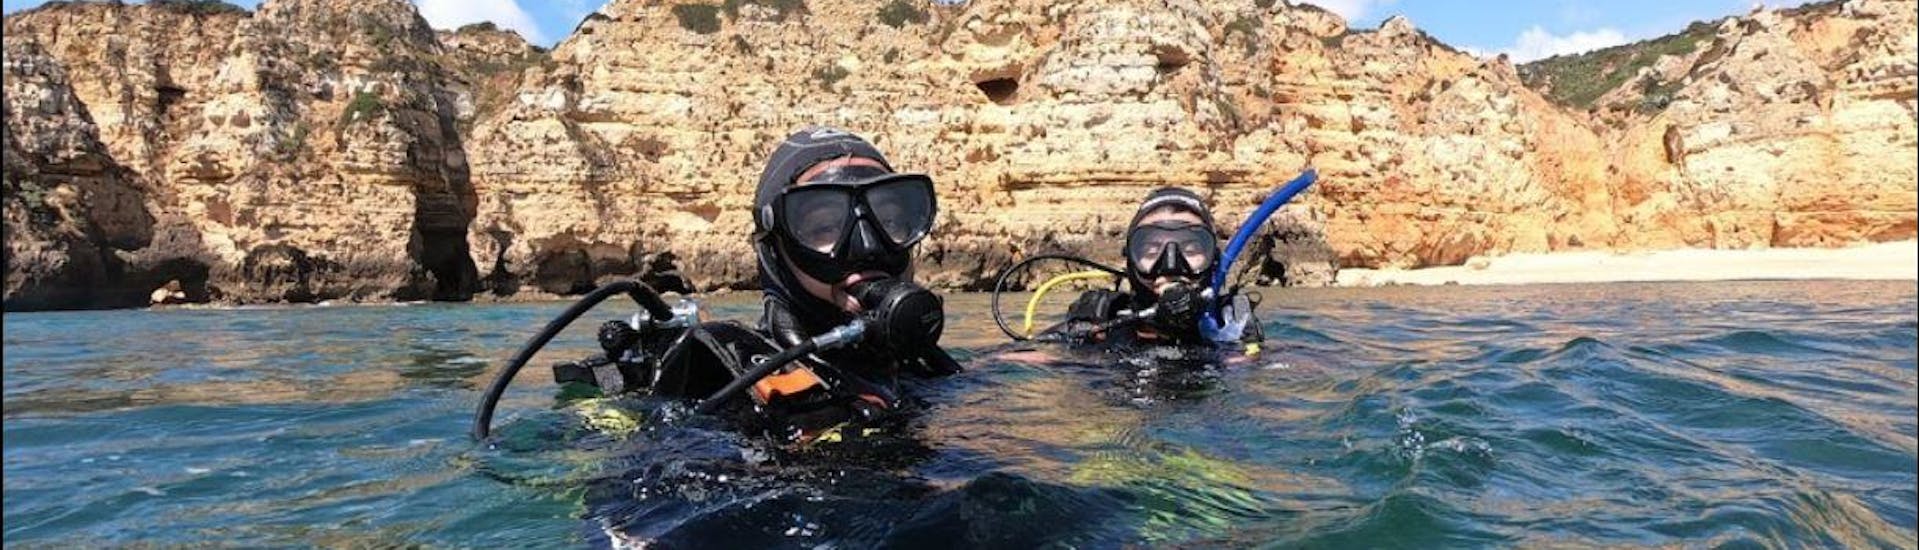 A man is doing a discover scuba diving course in Lagos at the Algarve with Lagos Divers.